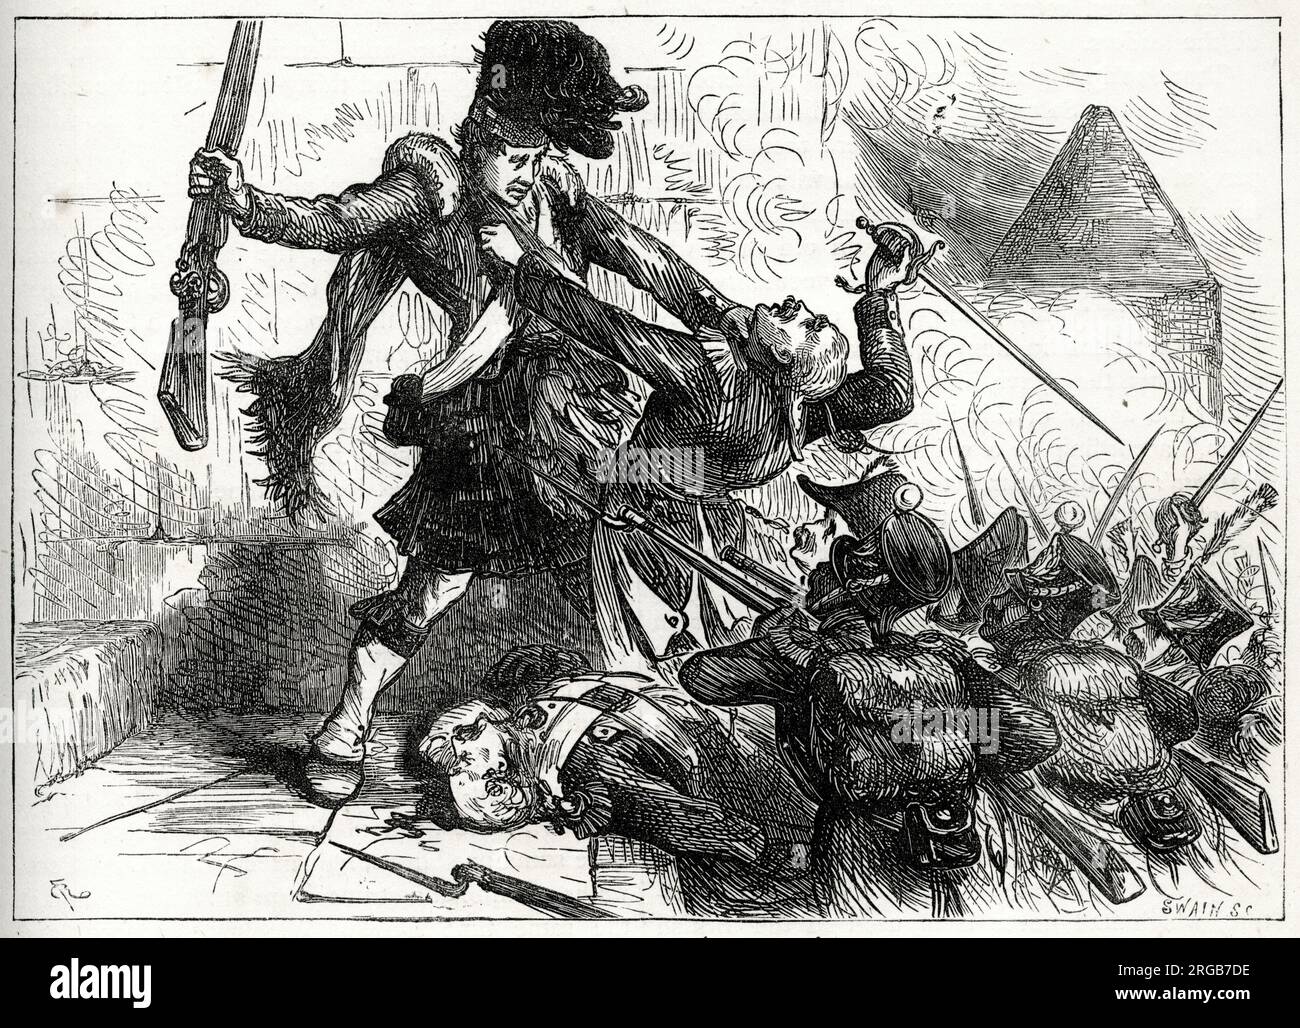 The Fraser Sentinel (of the Fraser Fencible Highlanders), Wexford Rebellion, Ireland, May to June 1798. The sentinel refused to leave his post in the face of an attack by French soldiers, despite being told to retreat, and was eventually killed. Stock Photo